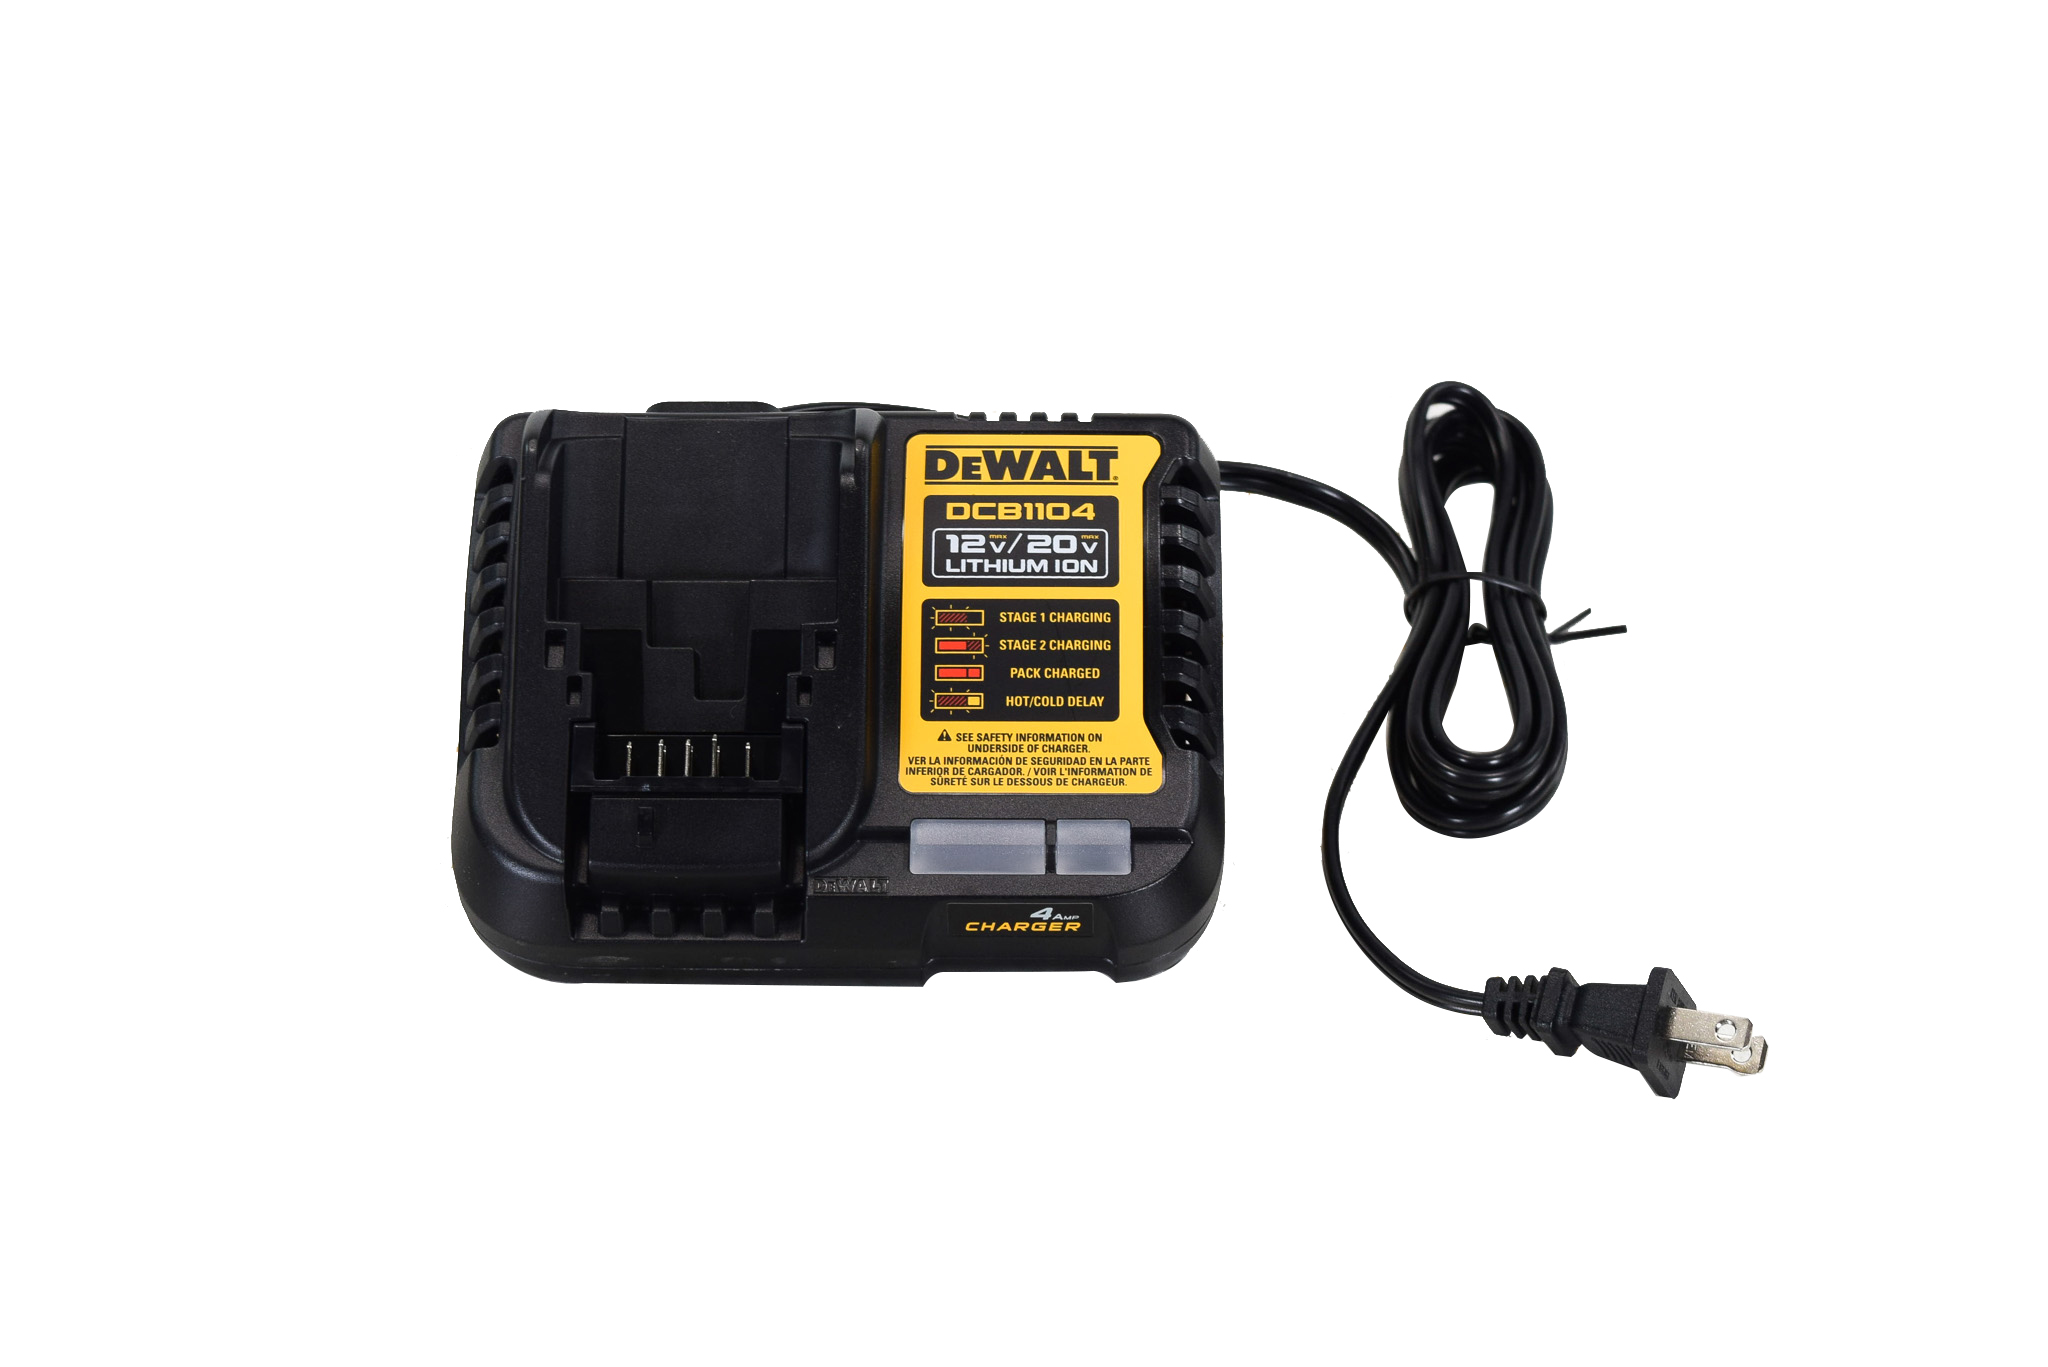 DEWALT DCF911P2 20V MAX* 1/2 in. Cordless Impact Wrench with Hog Ring Anvil  Kit